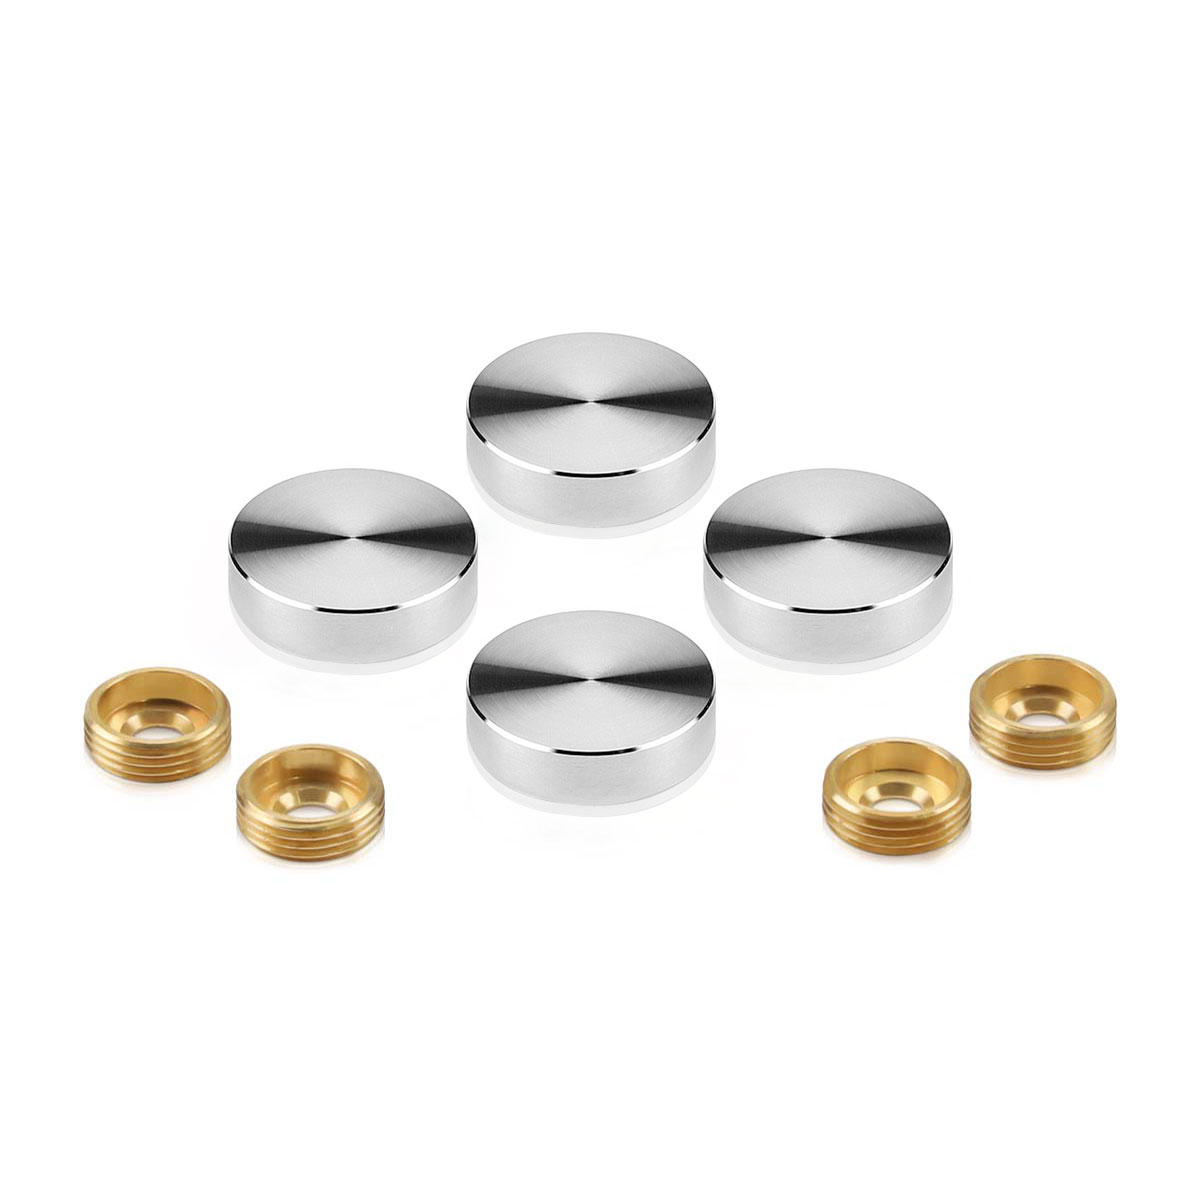 Set of 4 Screw Cover, Diameter: 1'', Satin Brushed Stainless Steel Finish (Indoor Use), Special for 3/16'' Diameter TAPCON Screw Slotted Hex (TAPCON Screw Sold Separately)